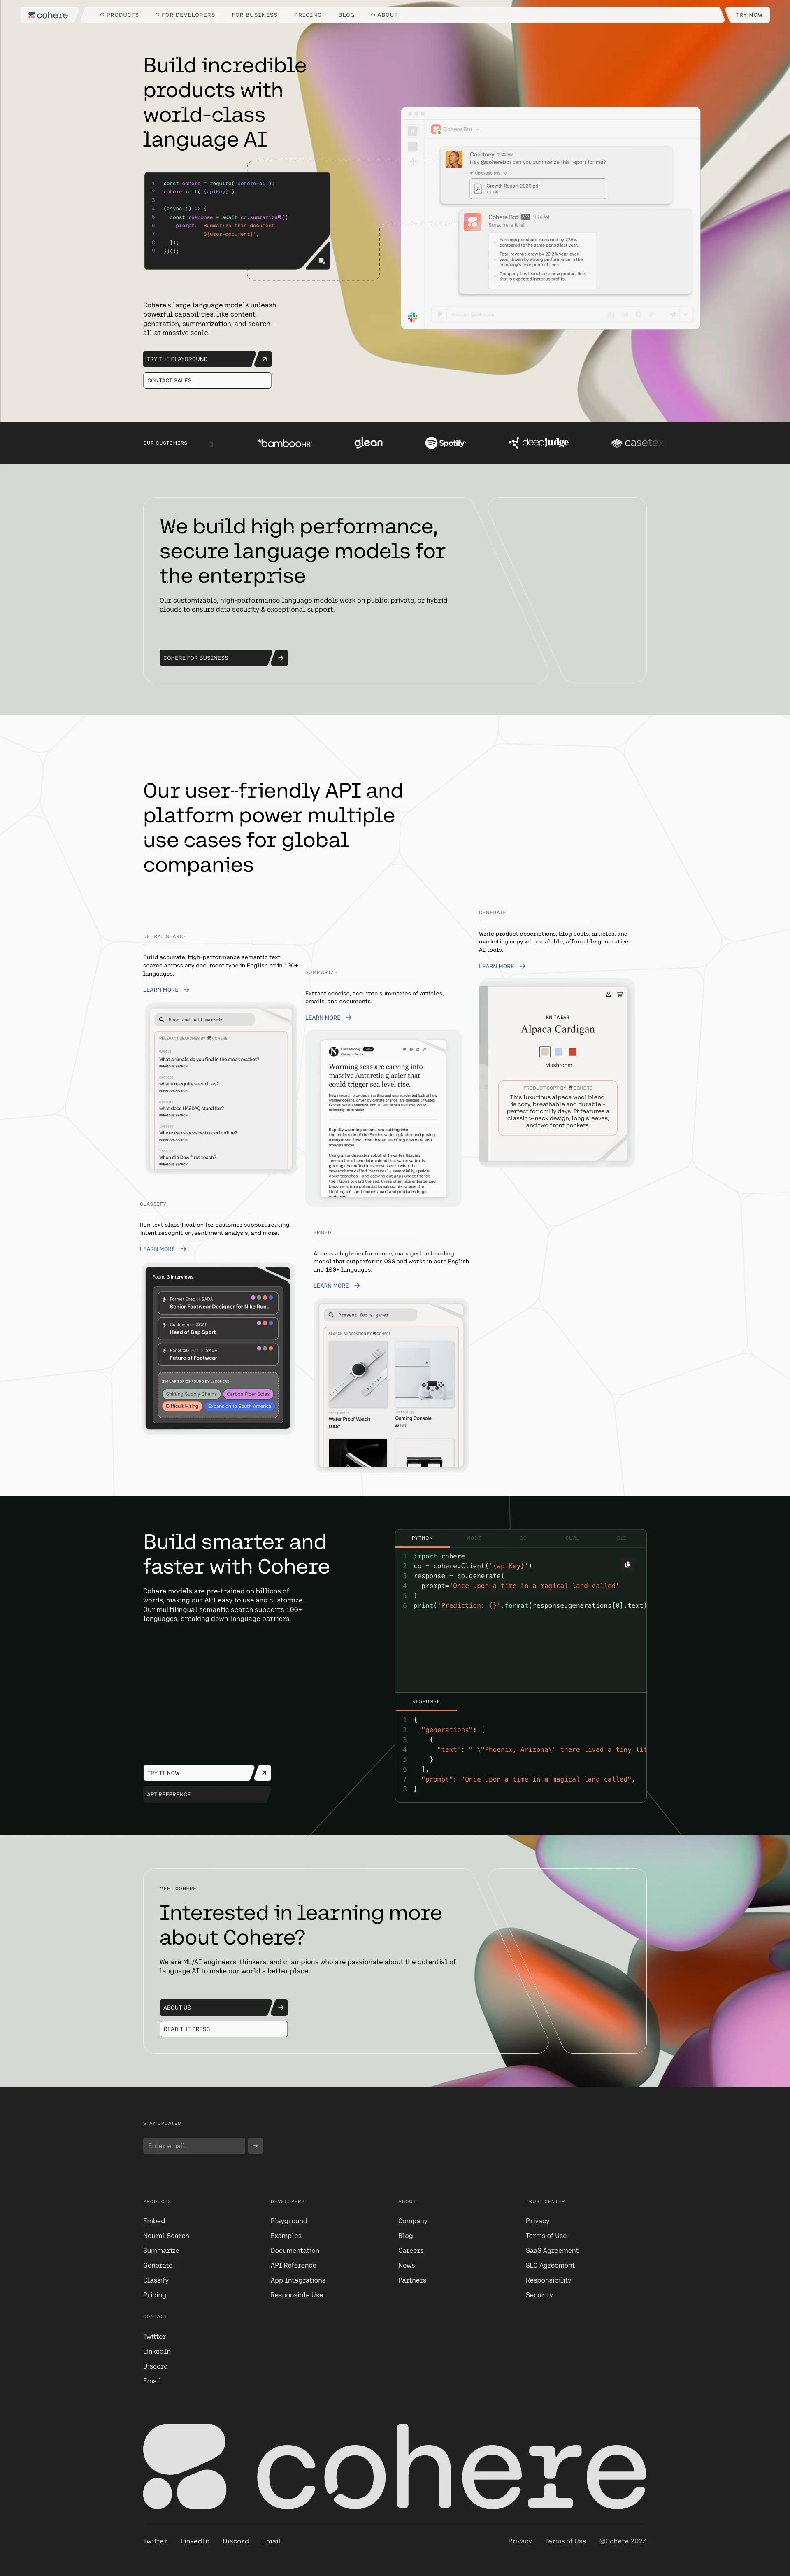 Cohere Landing Page Example: Building the Future of AI. Cohere provides access to advanced Large Language Models and NLP tools through one easy-to-use API.